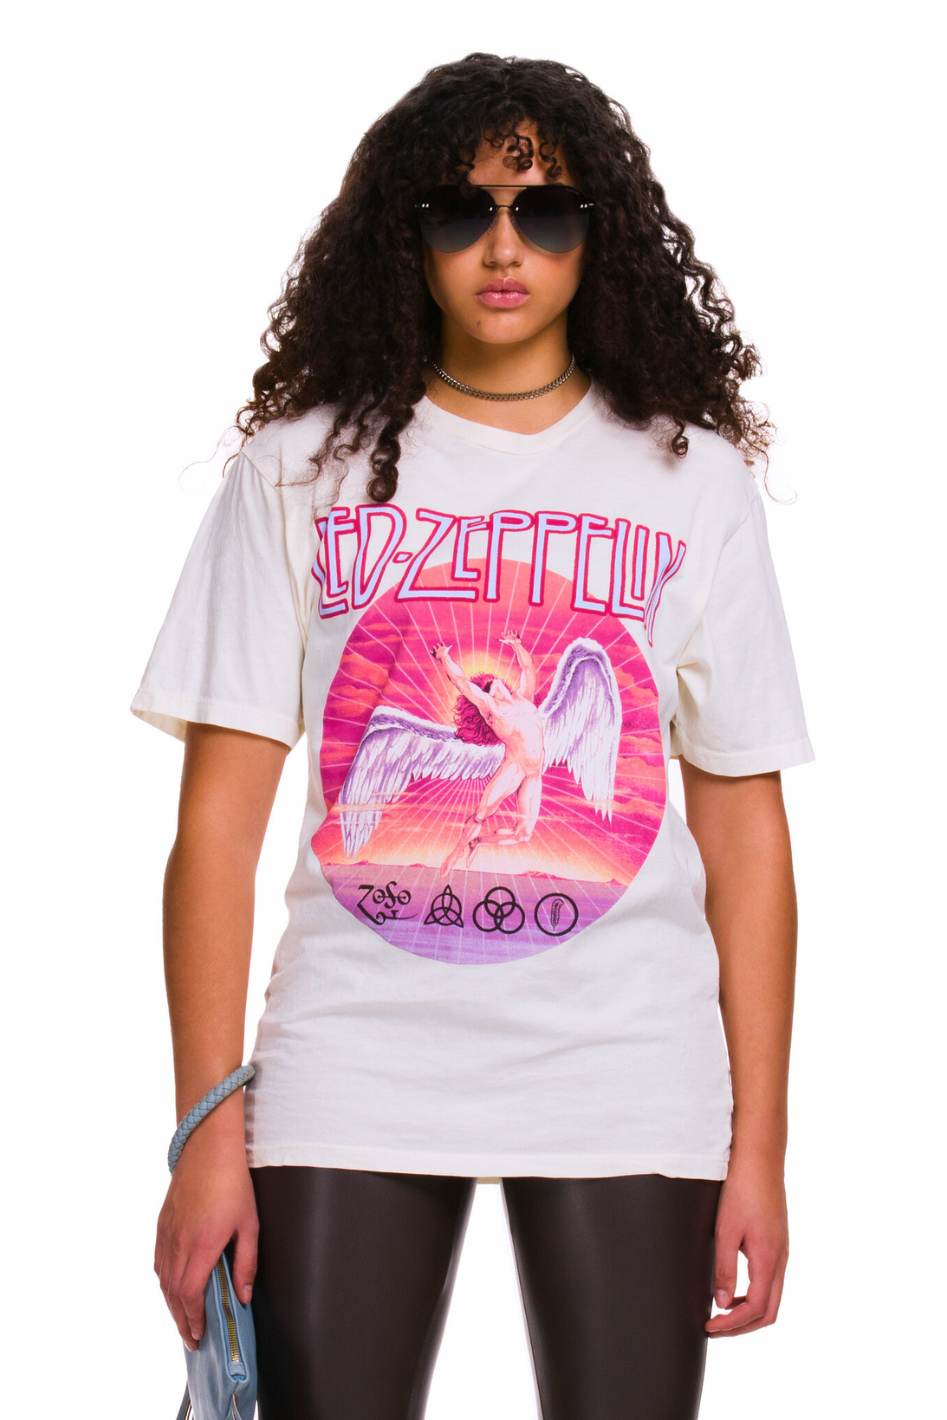 Led Zeppelin Swan Song Graphic T-Shirt - Expressive Collective CO.